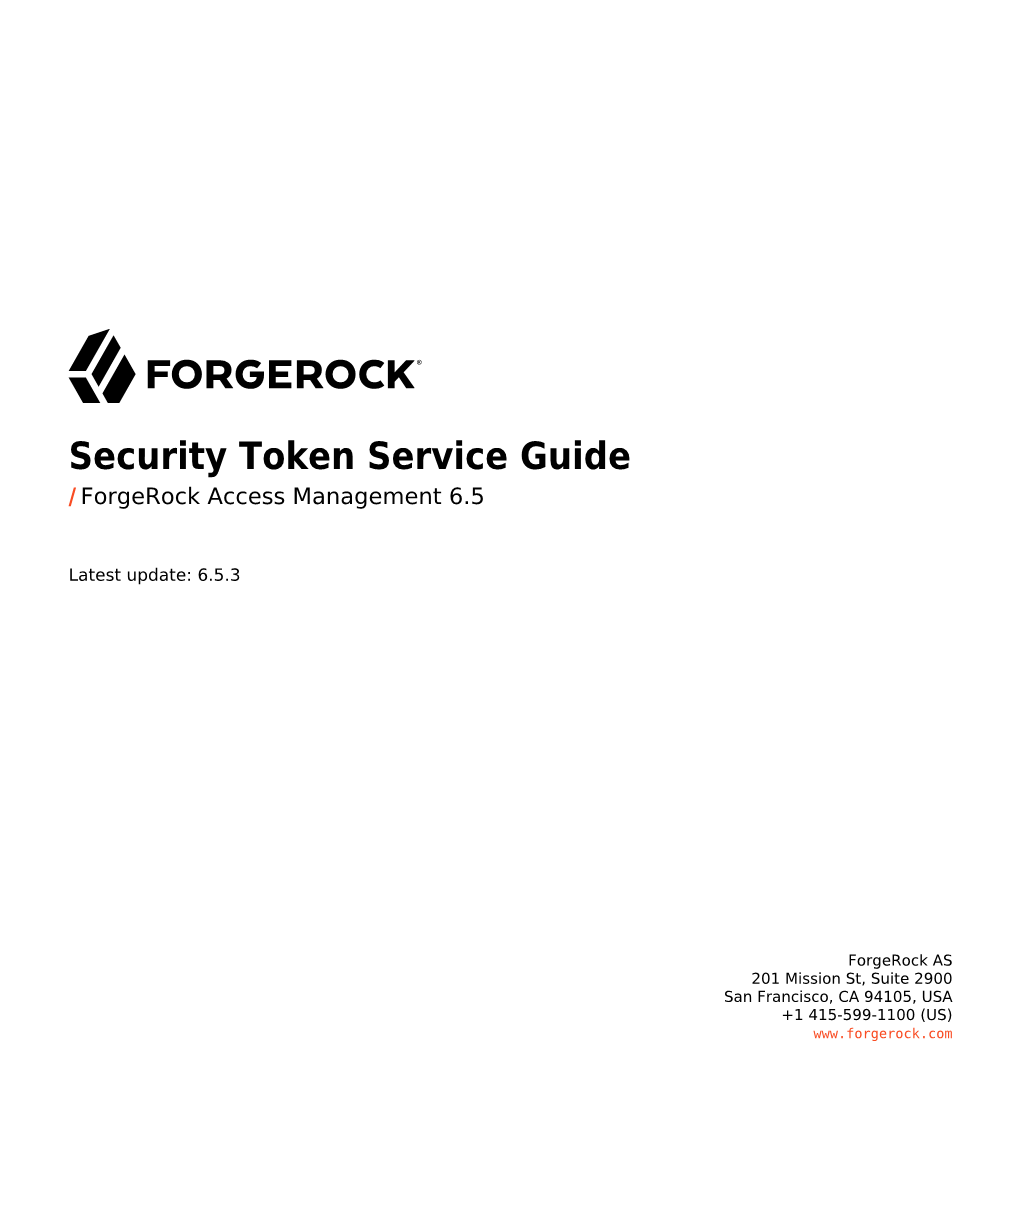 Security Token Service Guide / Forgerock Access Management 6.5